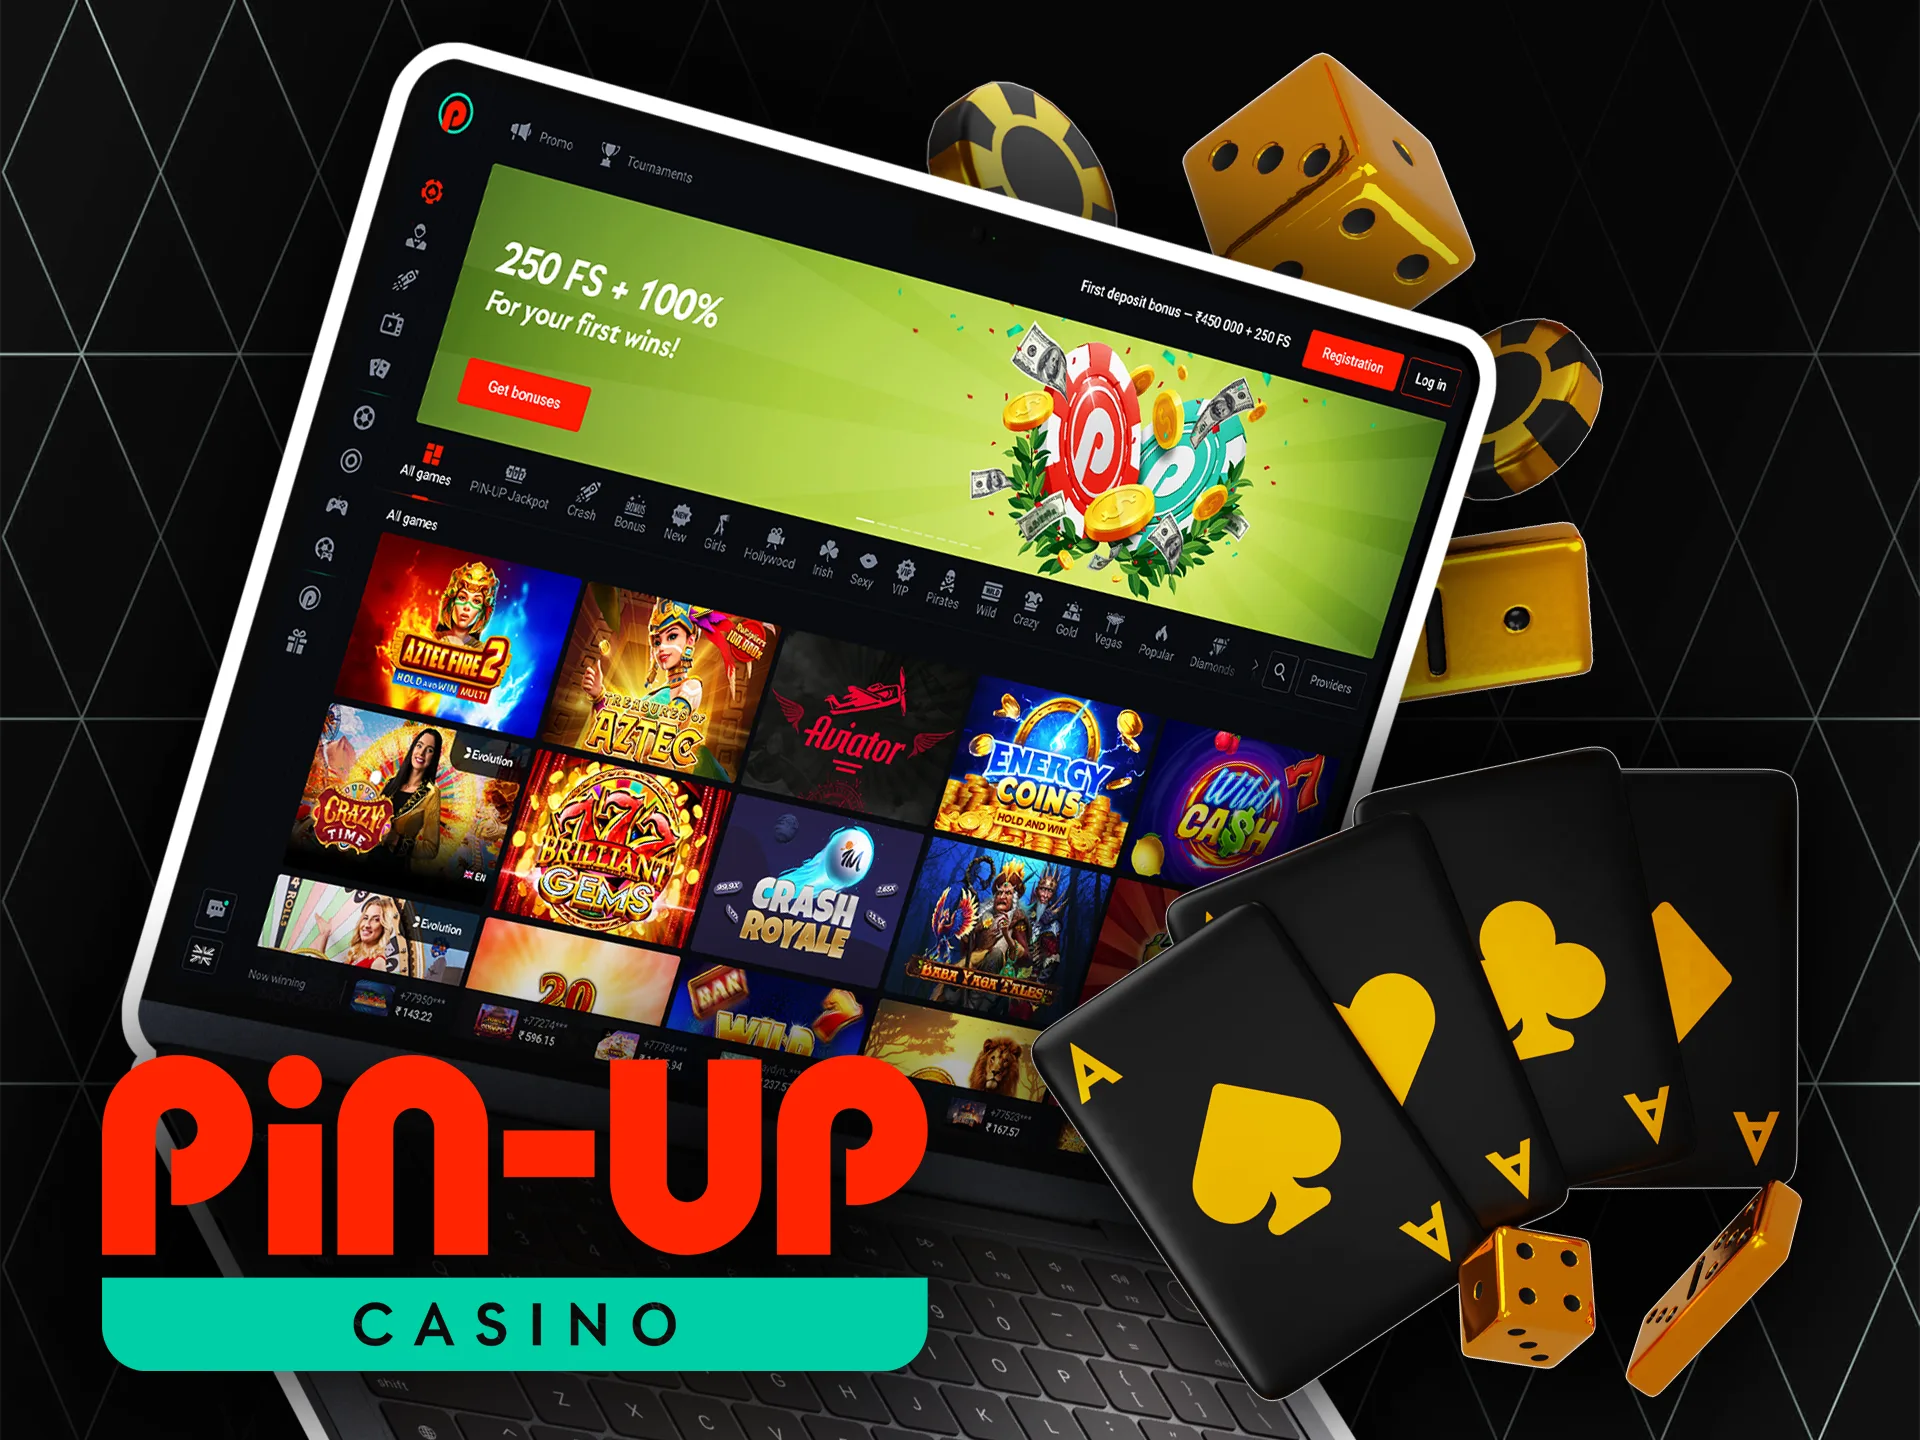 Pin-Up casino offers you lots of games like slots, table games, lotteries and others.